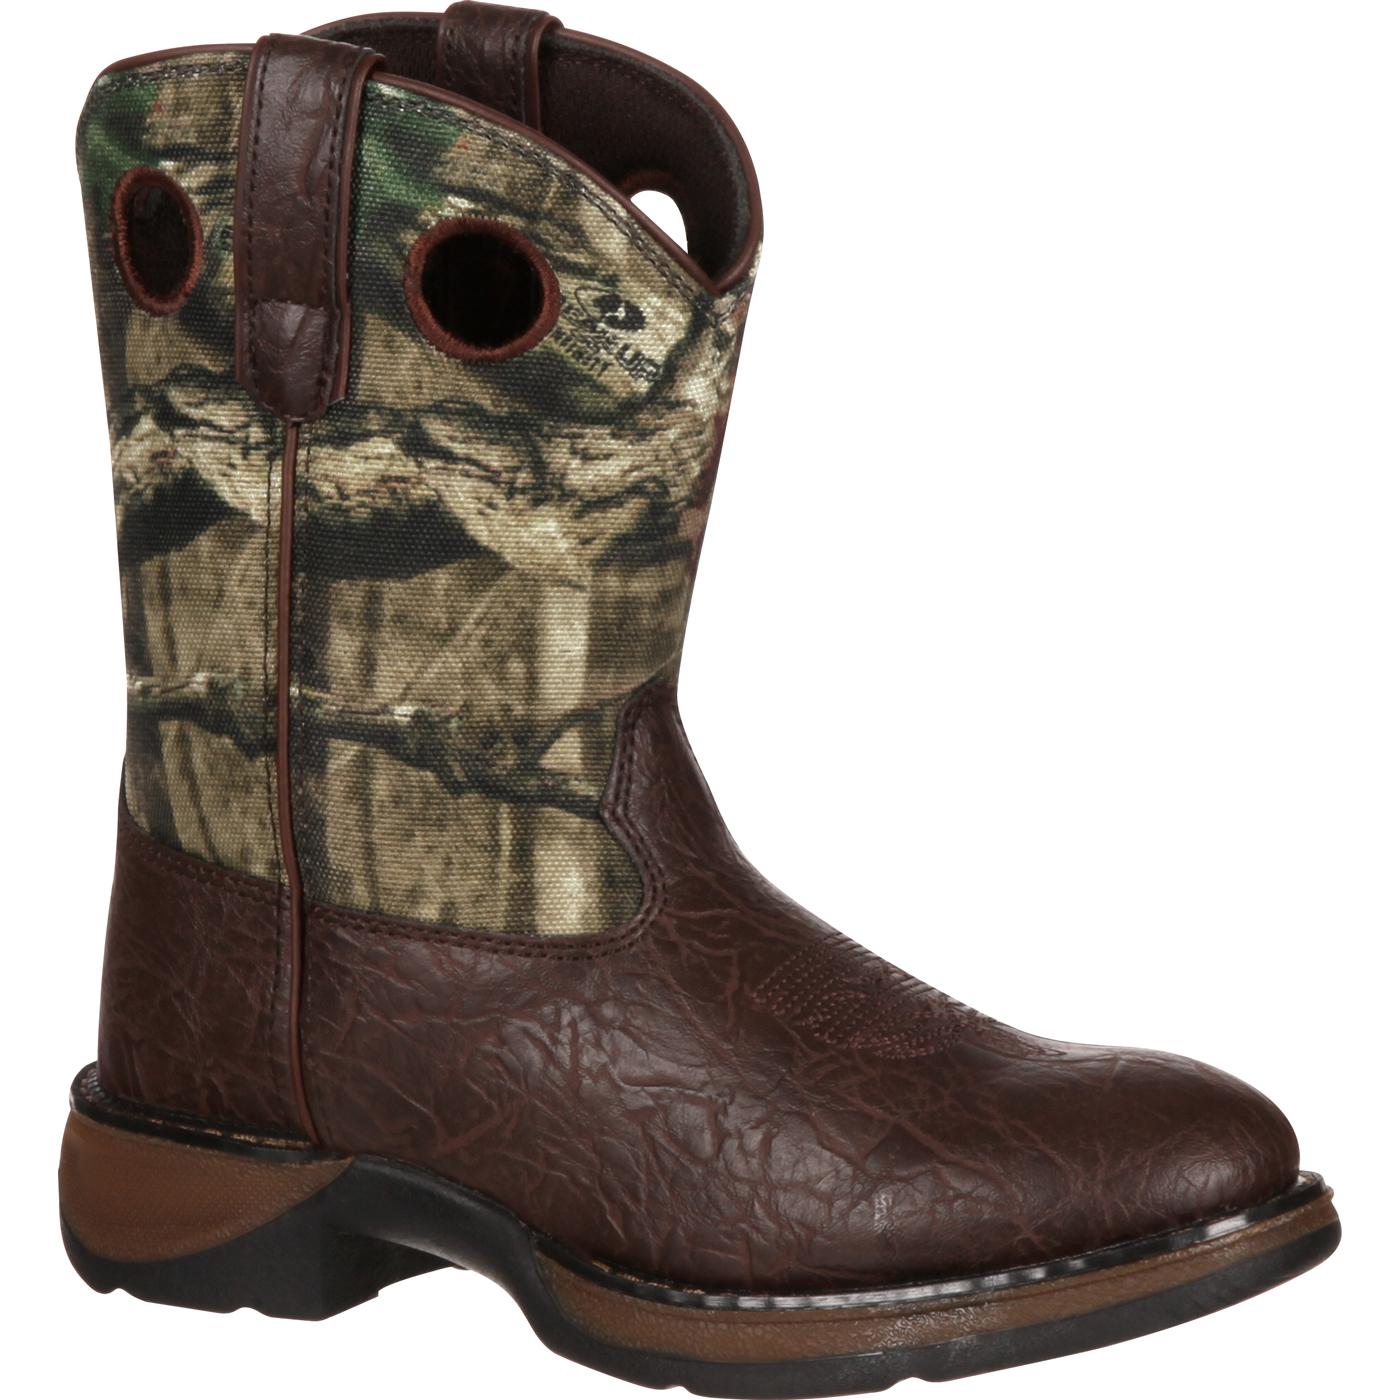 LIL' DURANGO® Little Kid Western Boot Size 10(M) - image 1 of 7